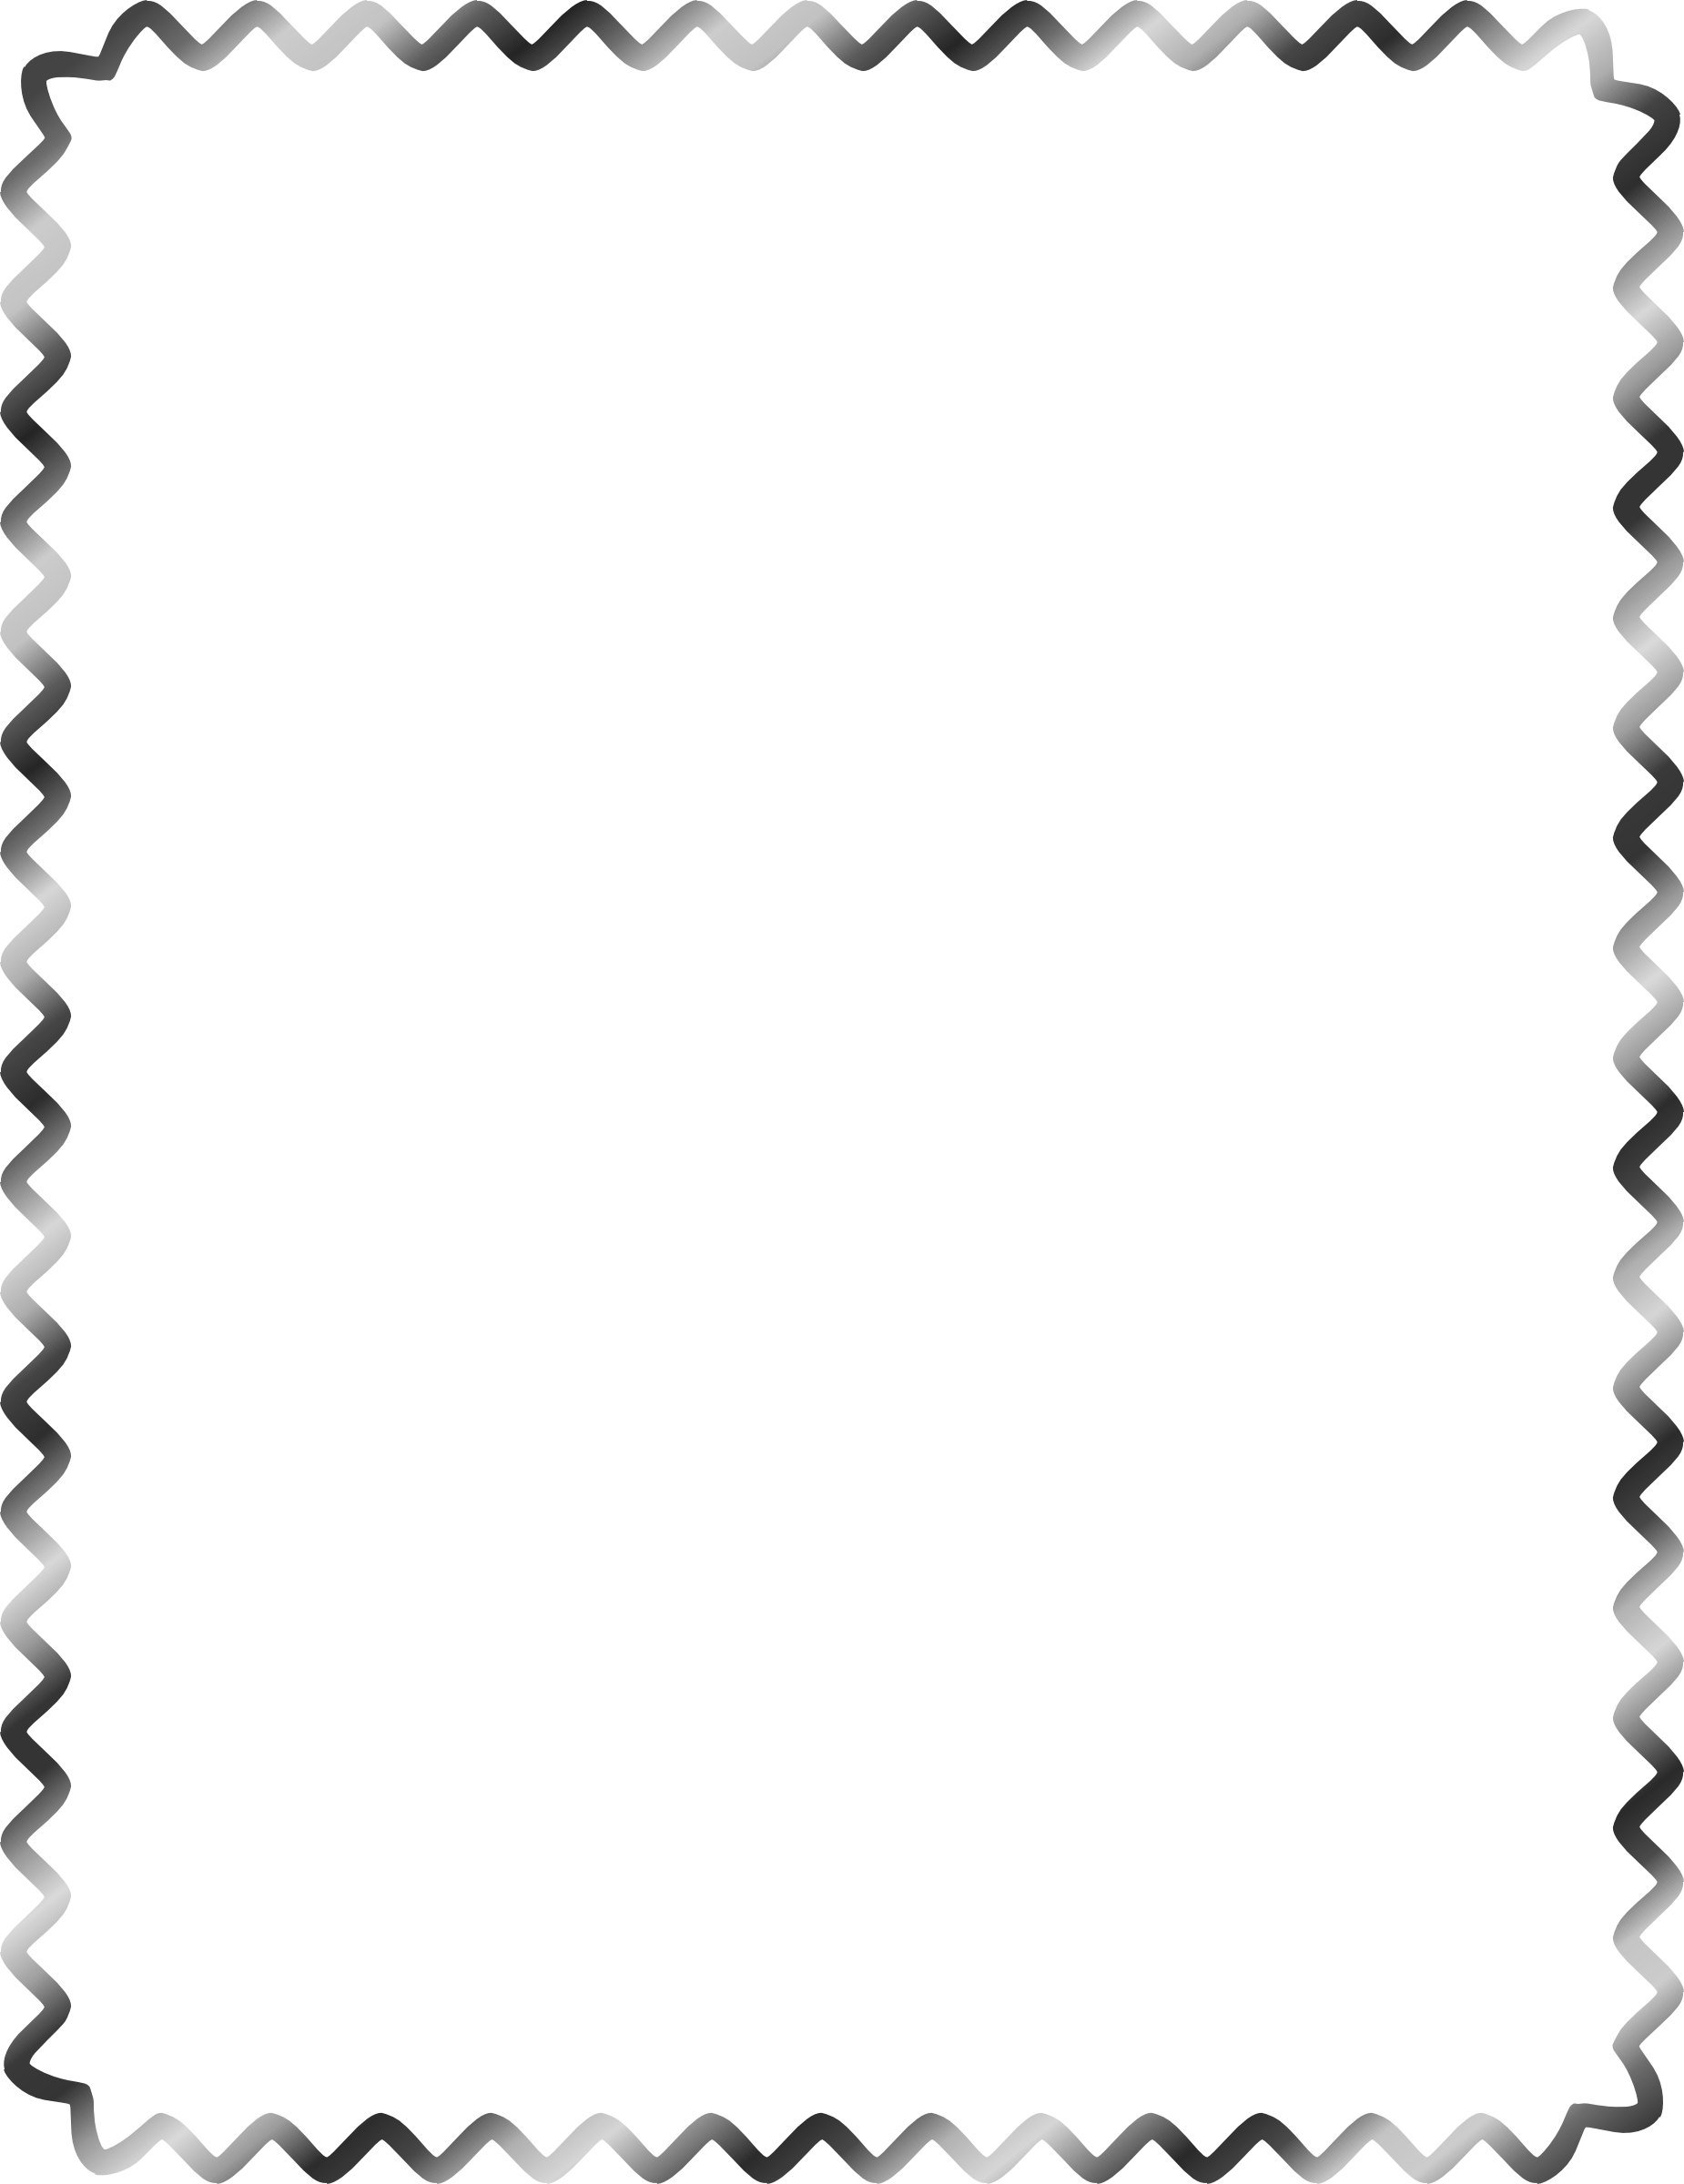 Water Waves Border Clipart - Black And White Border (1852x2400)